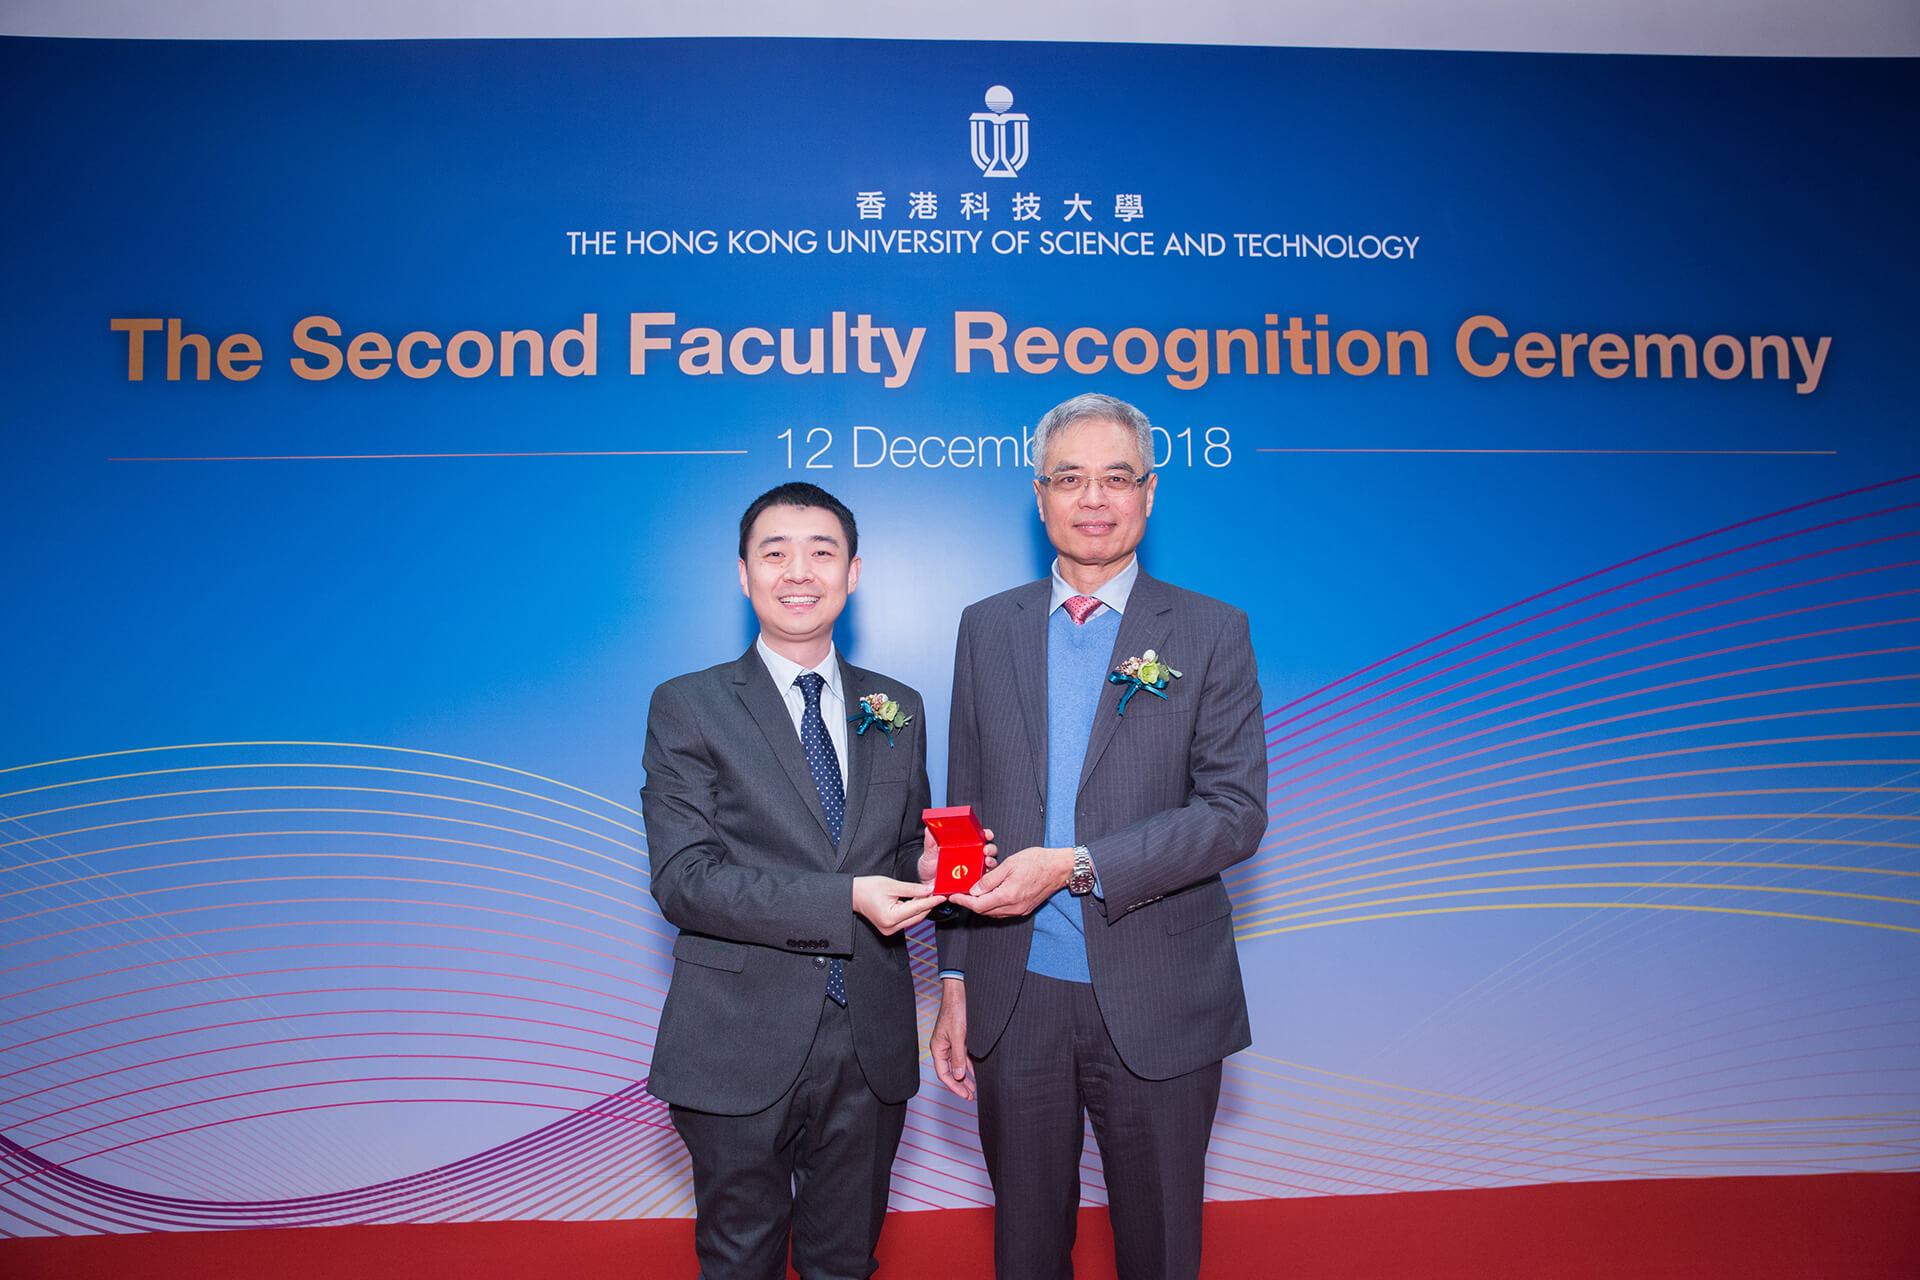 Faculty Recognition Ceremony 2018